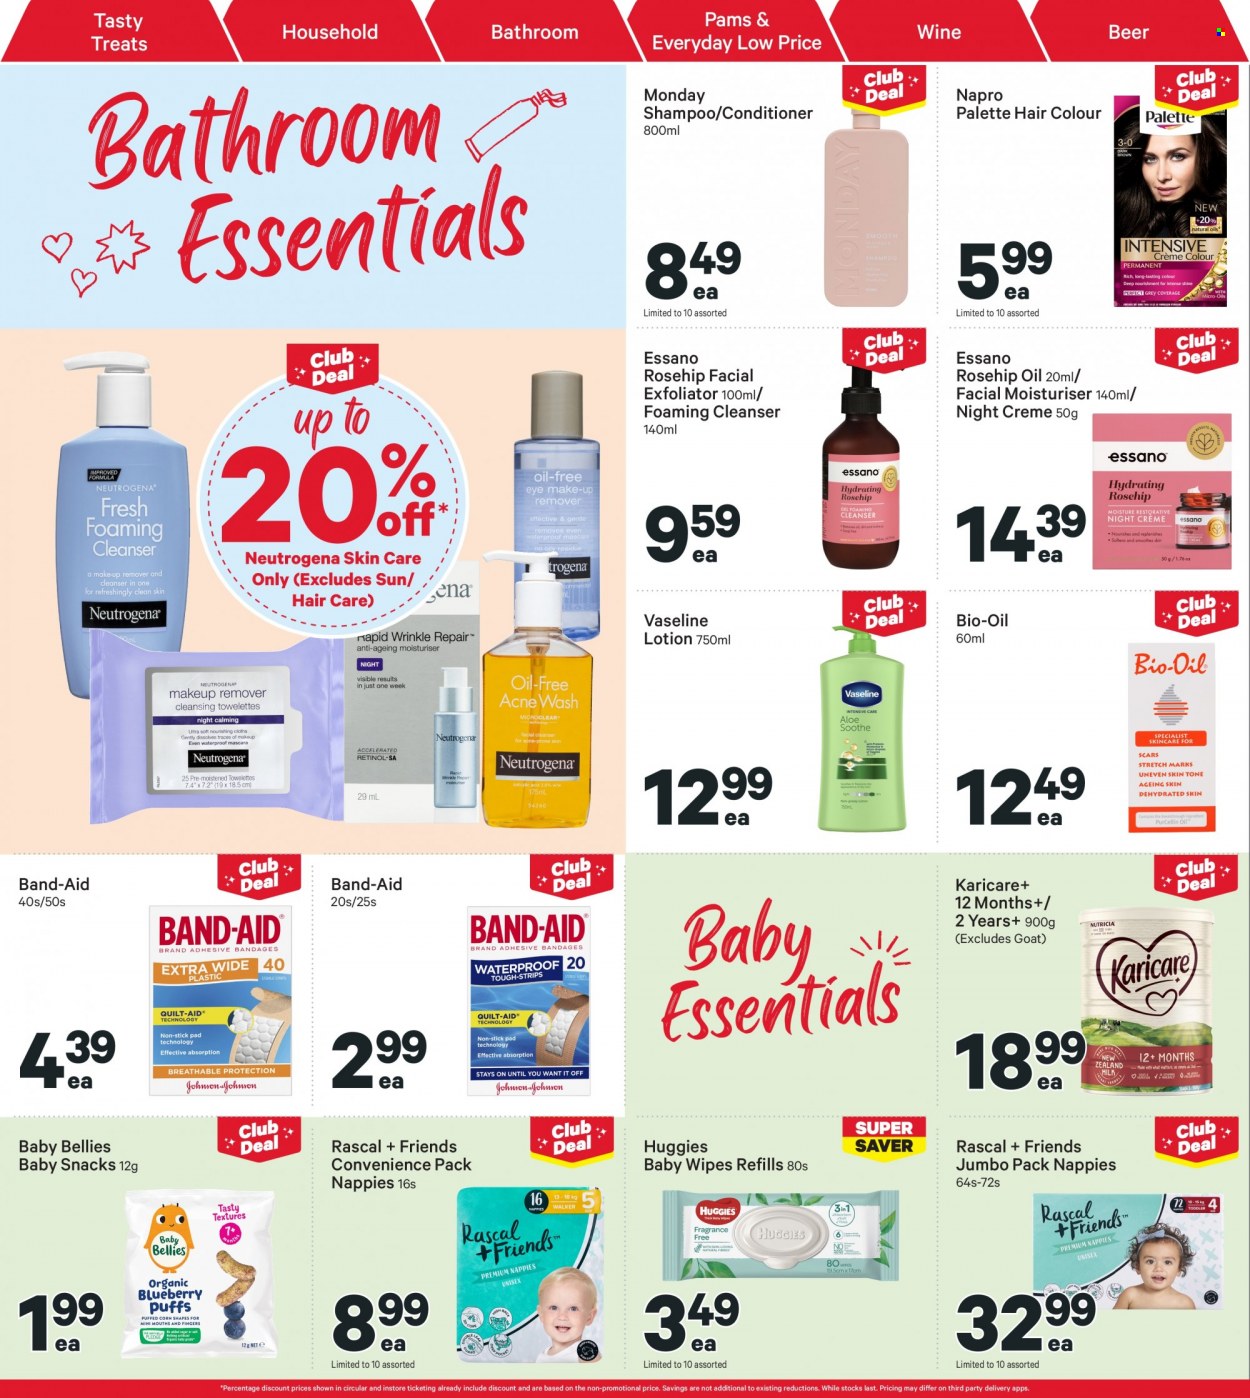 thumbnail - New World mailer - 23.01.2023 - 29.01.2023 - Sales products - snack, oil, beer, wipes, Huggies, baby wipes, nappies, shampoo, Vaseline, cleanser, Neutrogena, rosehip oil, conditioner, Palette, hair color, Essano, body lotion, band-aid. Page 30.